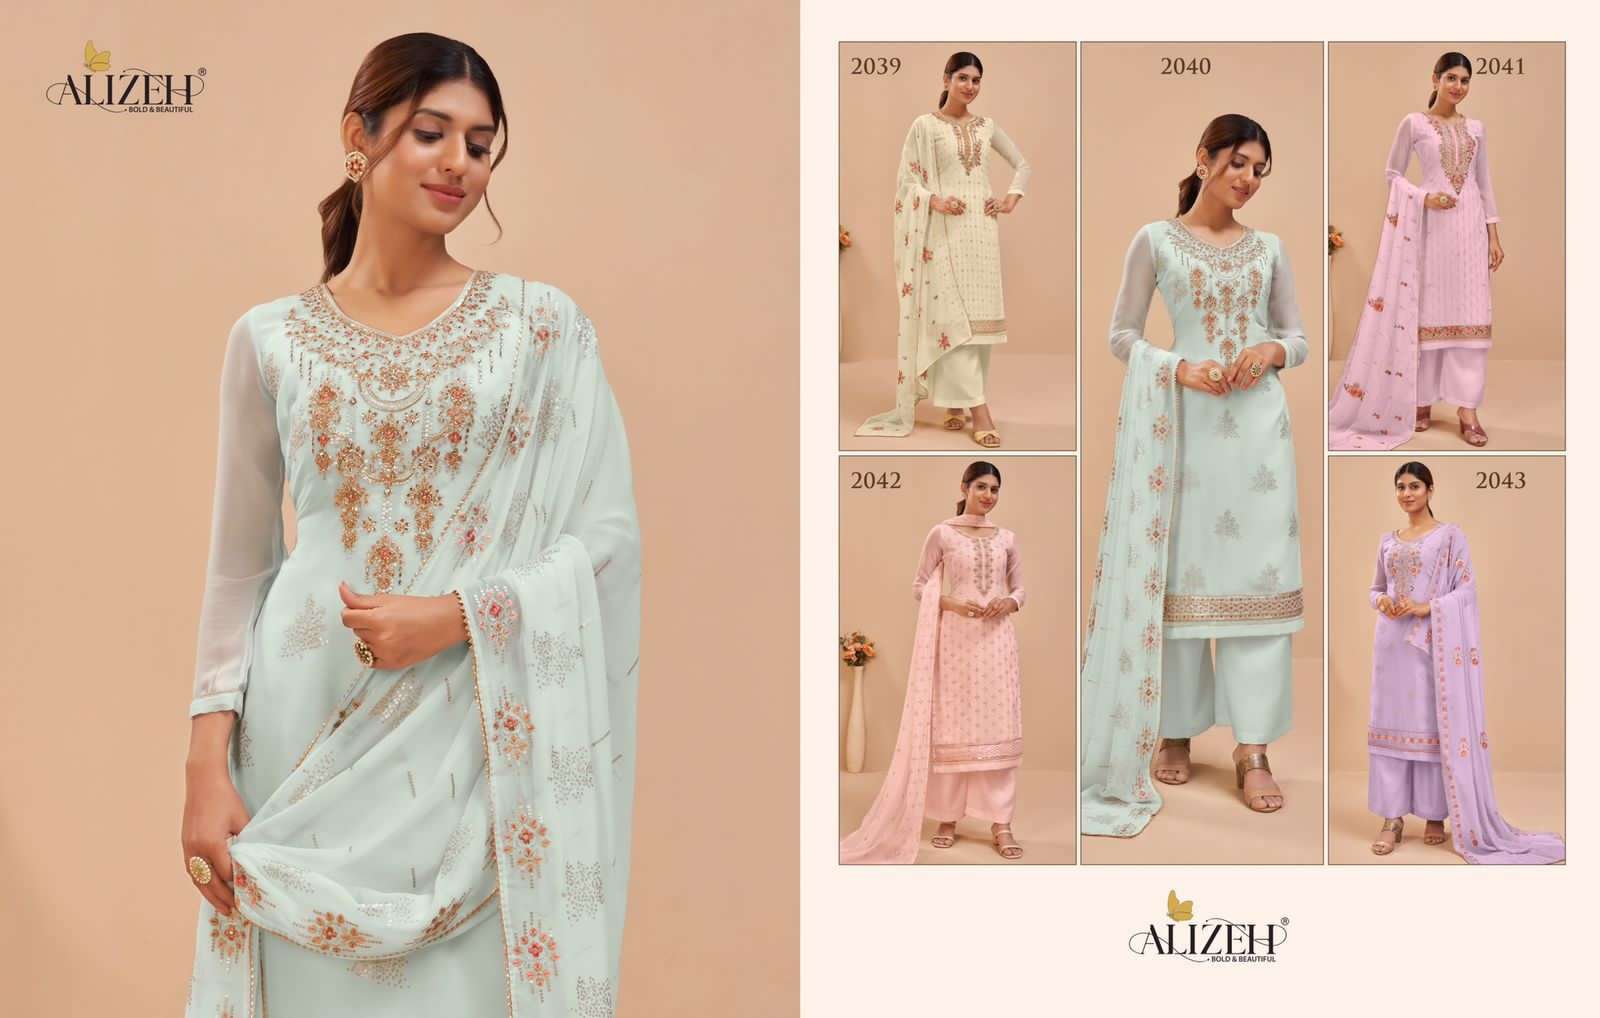 MURAD VOL-6 BY ALIZEH 2039 TO 2043 SERIES BEAUTIFUL SUITS COLORFUL STYLISH FANCY CASUAL WEAR & ETHNIC WEAR PURE GEORGETTE EMBROIDERED DRESSES AT WHOLESALE PRICE